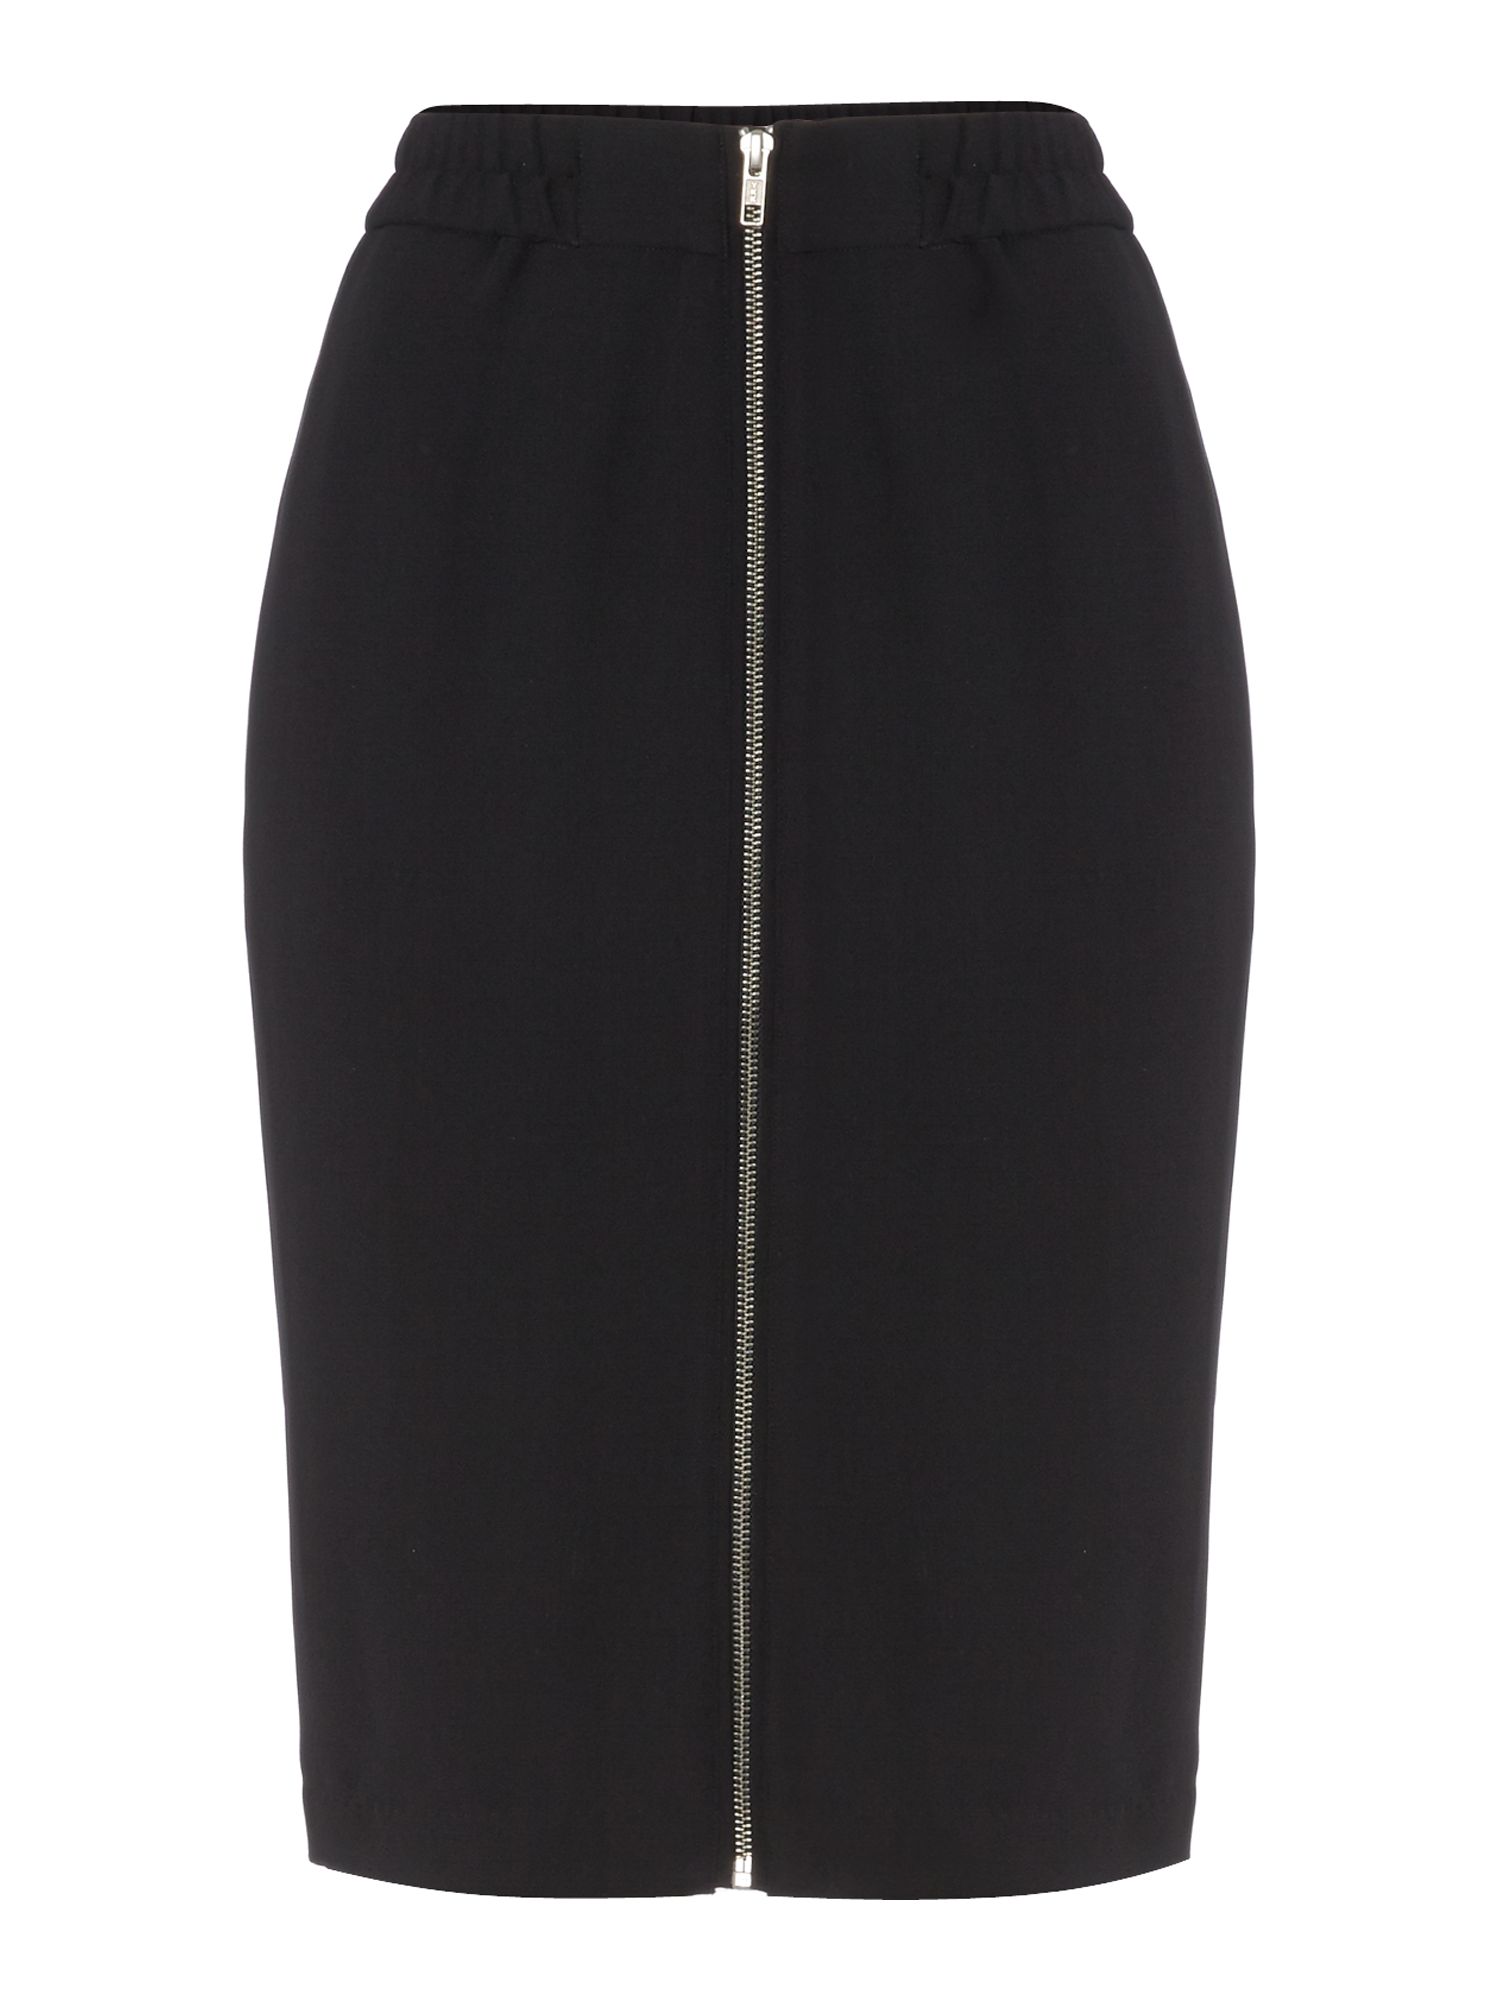 Pied A Terre Zip Front Sport Pencil Skirt in Black | Lyst